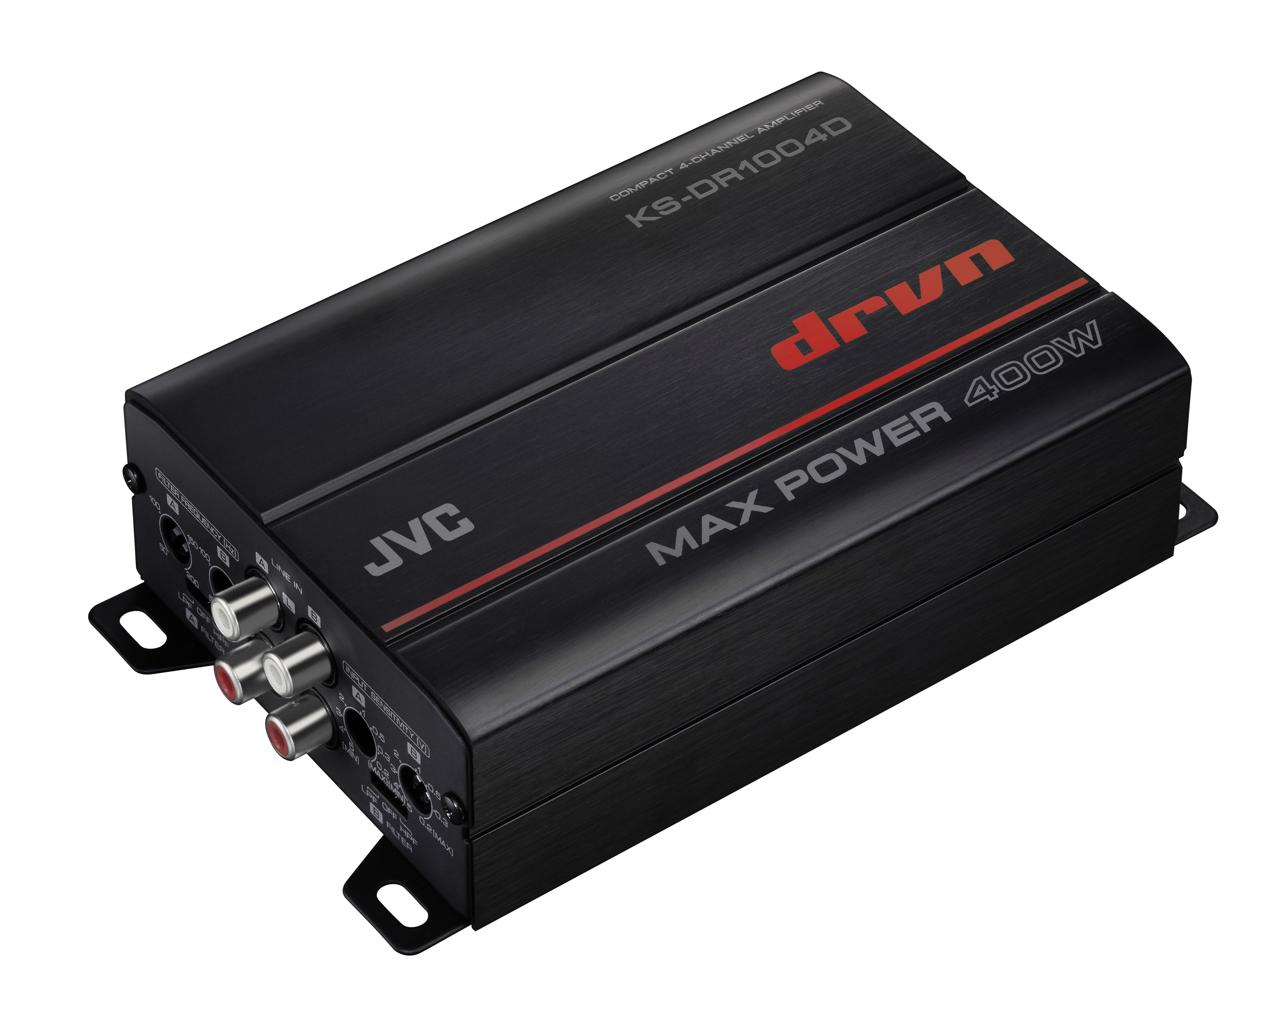 Jvc KS-DR1004D 400W Car, Marine and Powersports 4-Channel Amplifier